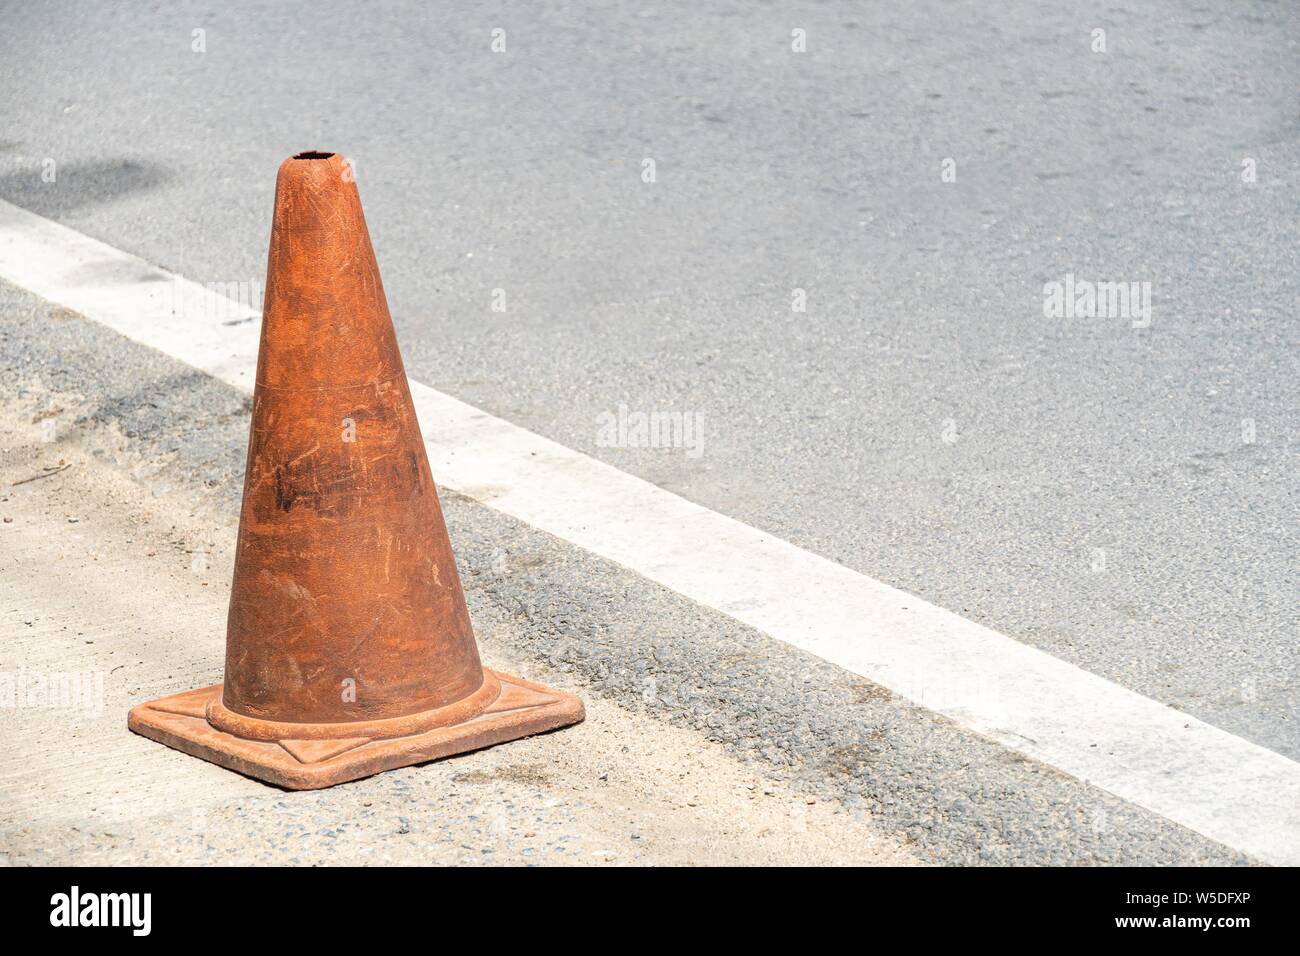 Old Traffic cones, also called pylons, witches' hats, road cones, highway cones, safety cones, channelizing devices, or construction cones Stock Photo